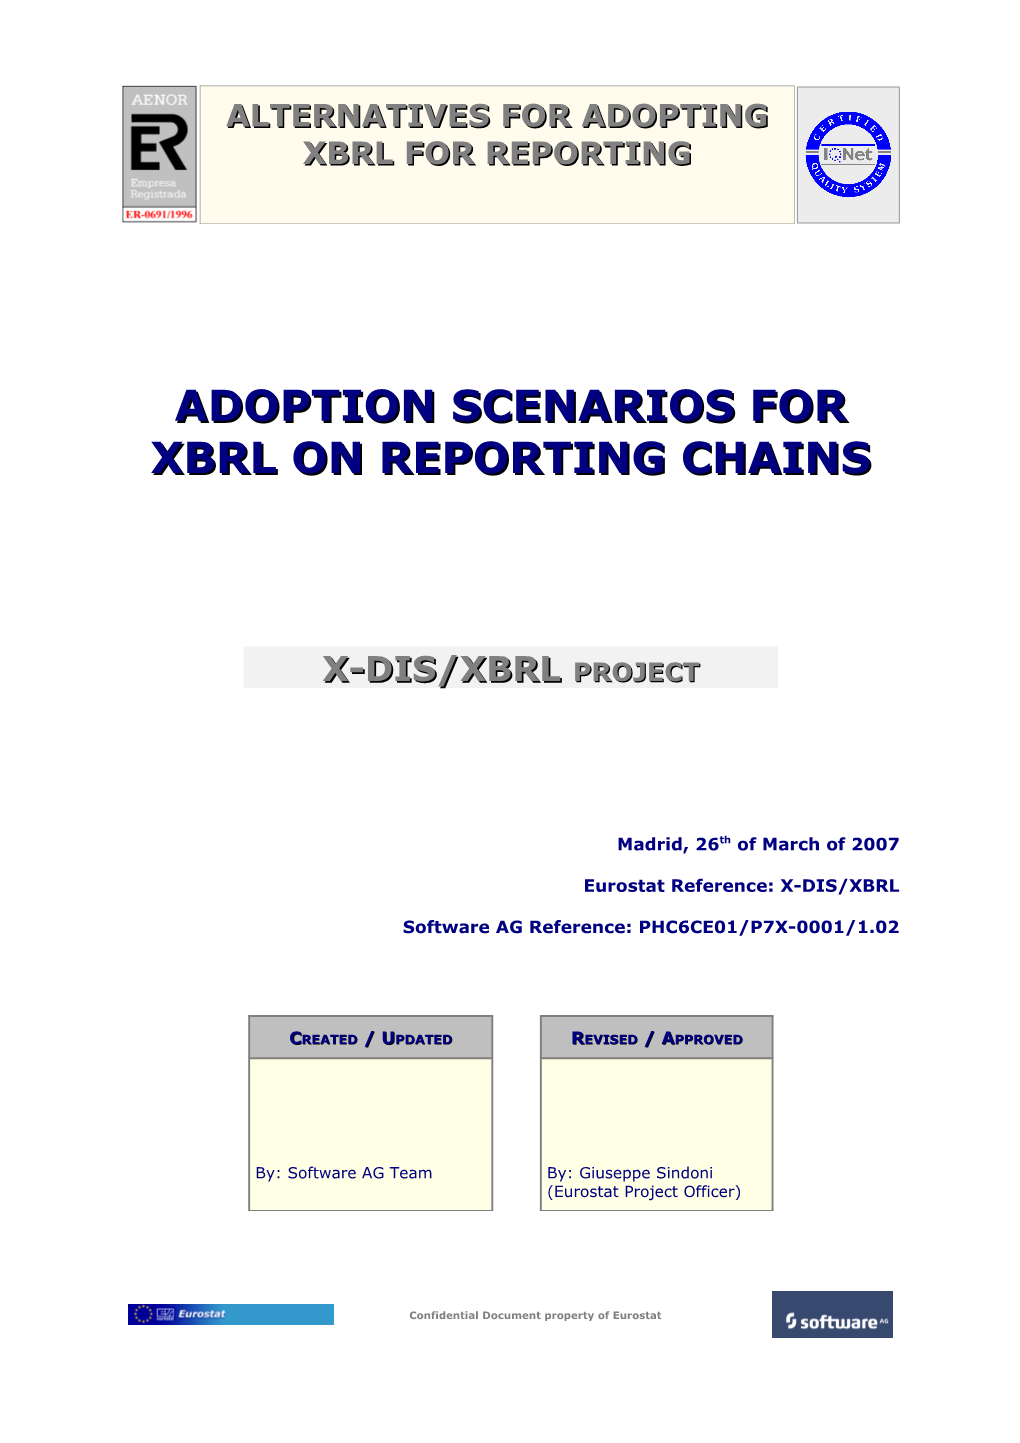 Adoption Scenarios for Xbrl on Reporting Chains